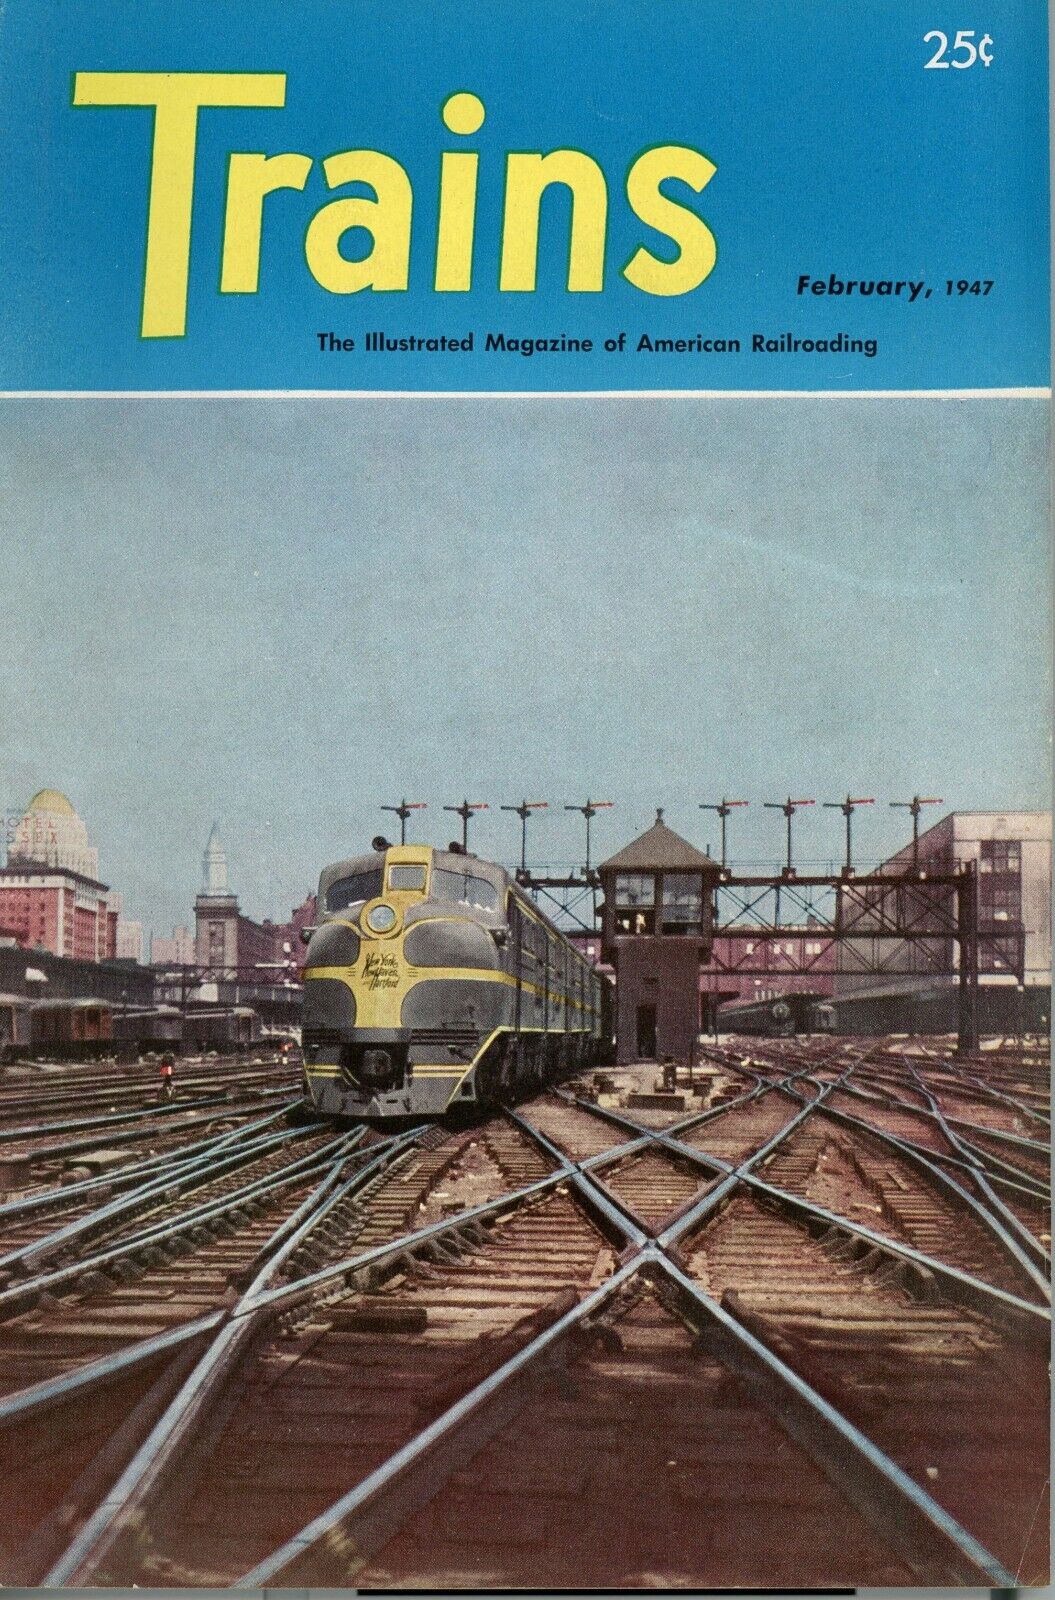 1947-2, FEBRUARY TRAINS MAGAZINE VOLUME 7, NUMBER 4 FULL OF GREAT PICS/ADS 1947